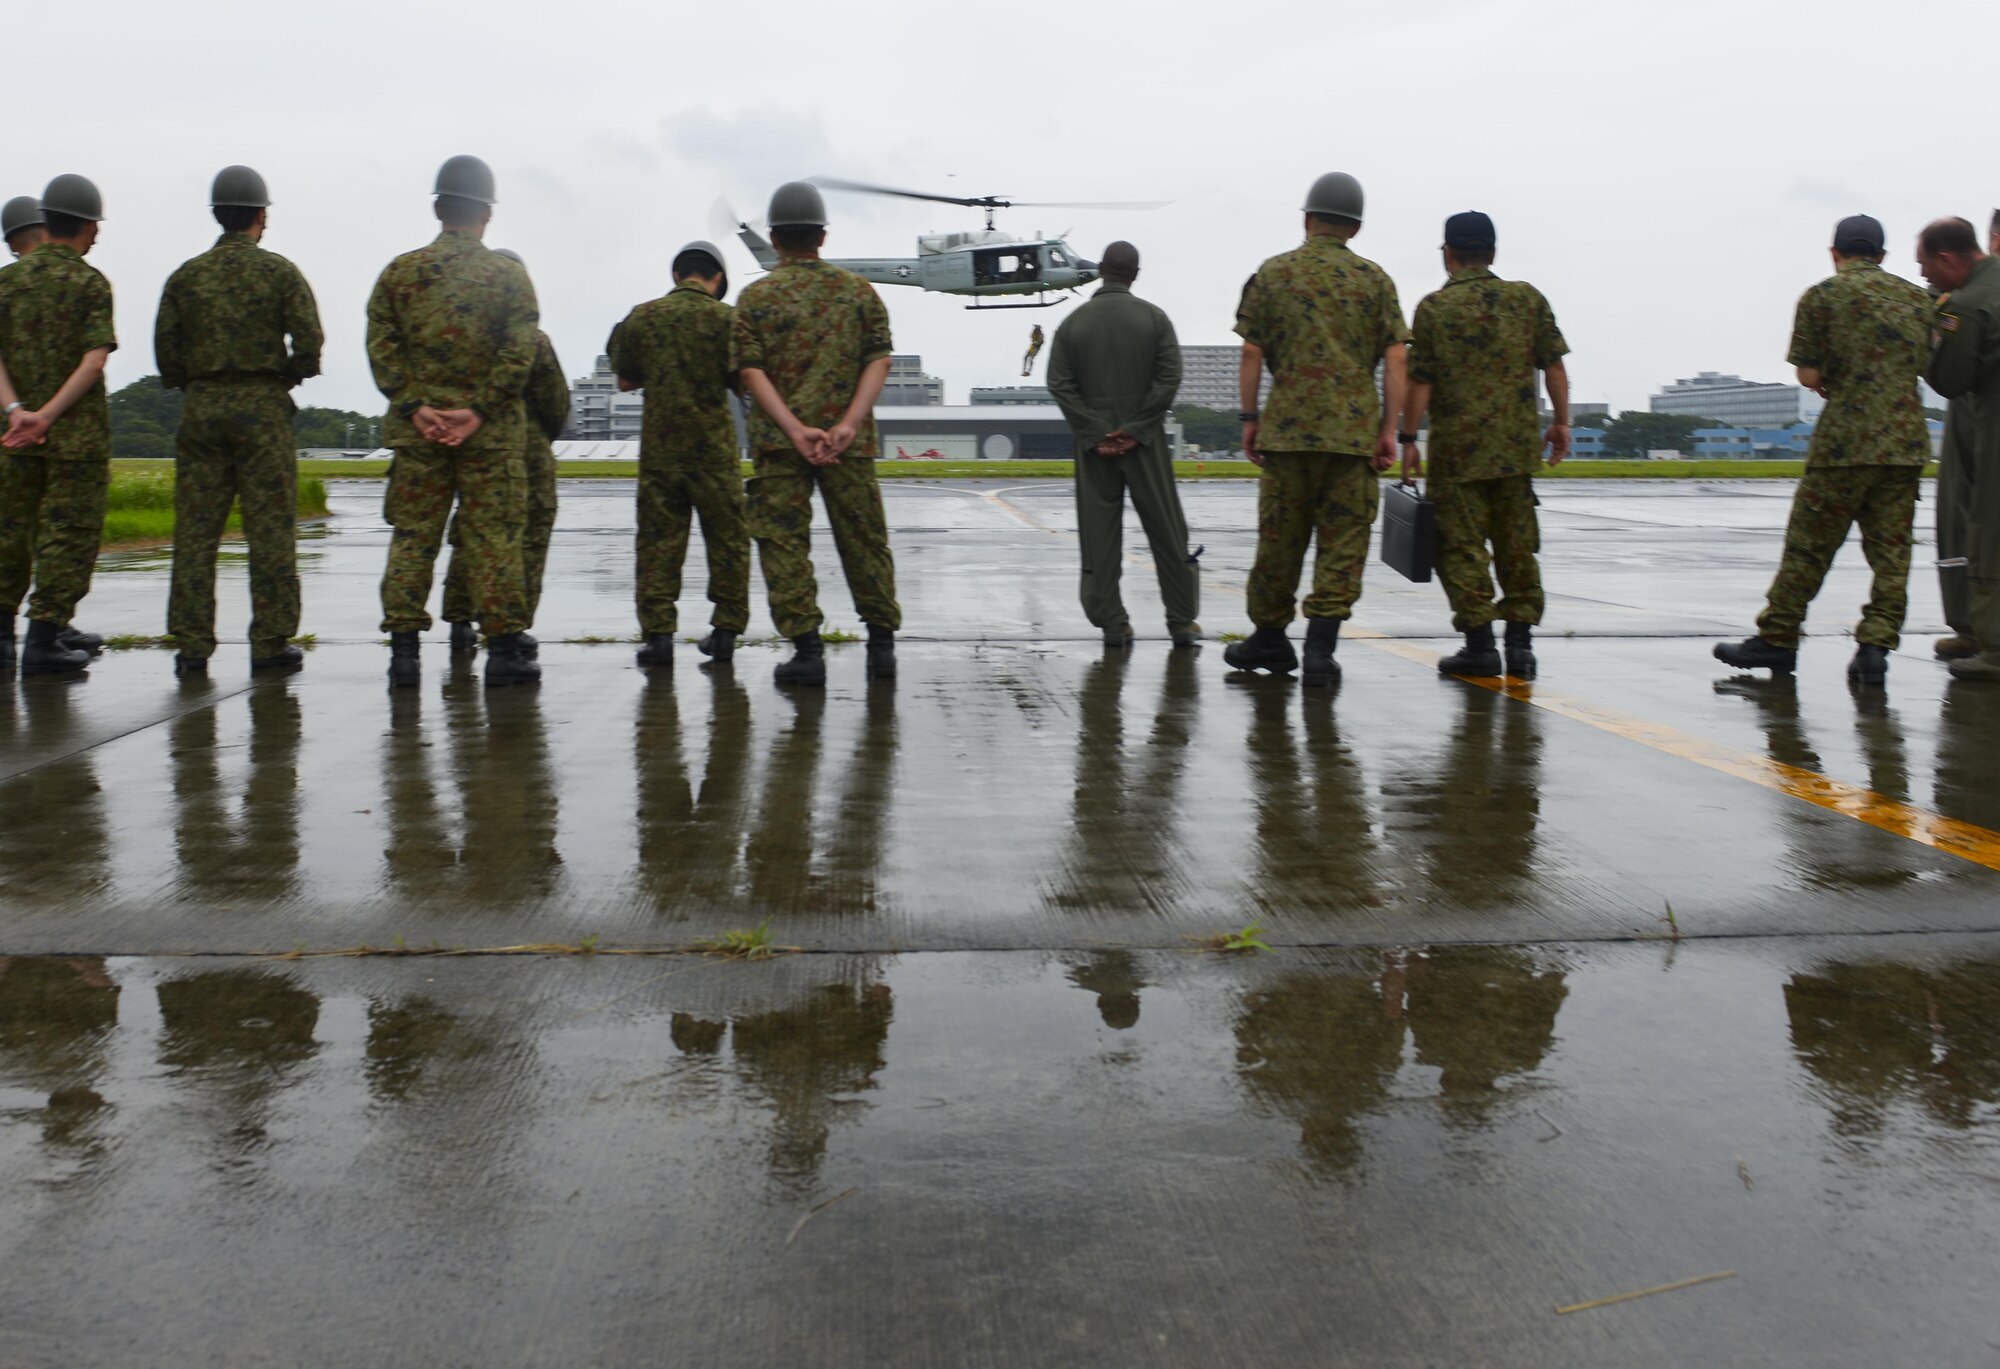 Members of the Japan Ground Self Defense Force watch the 459thth Airlift Squadron familiarize with a rescue operation at Camp Tachikawa, July 26, 2016. Eastern Army Helicopter invited the 459th Airlift Squadron to attend the 2nd Tachikawa Helicopter Conference as friends and valuable allies. U.S. forces have supported Japan disaster-relief efforts in the past and staying in communication helps ensure we are prepared to do so again.  (U.S. Air Force photo by Airman 1st Class Elizabeth Baker/Released)